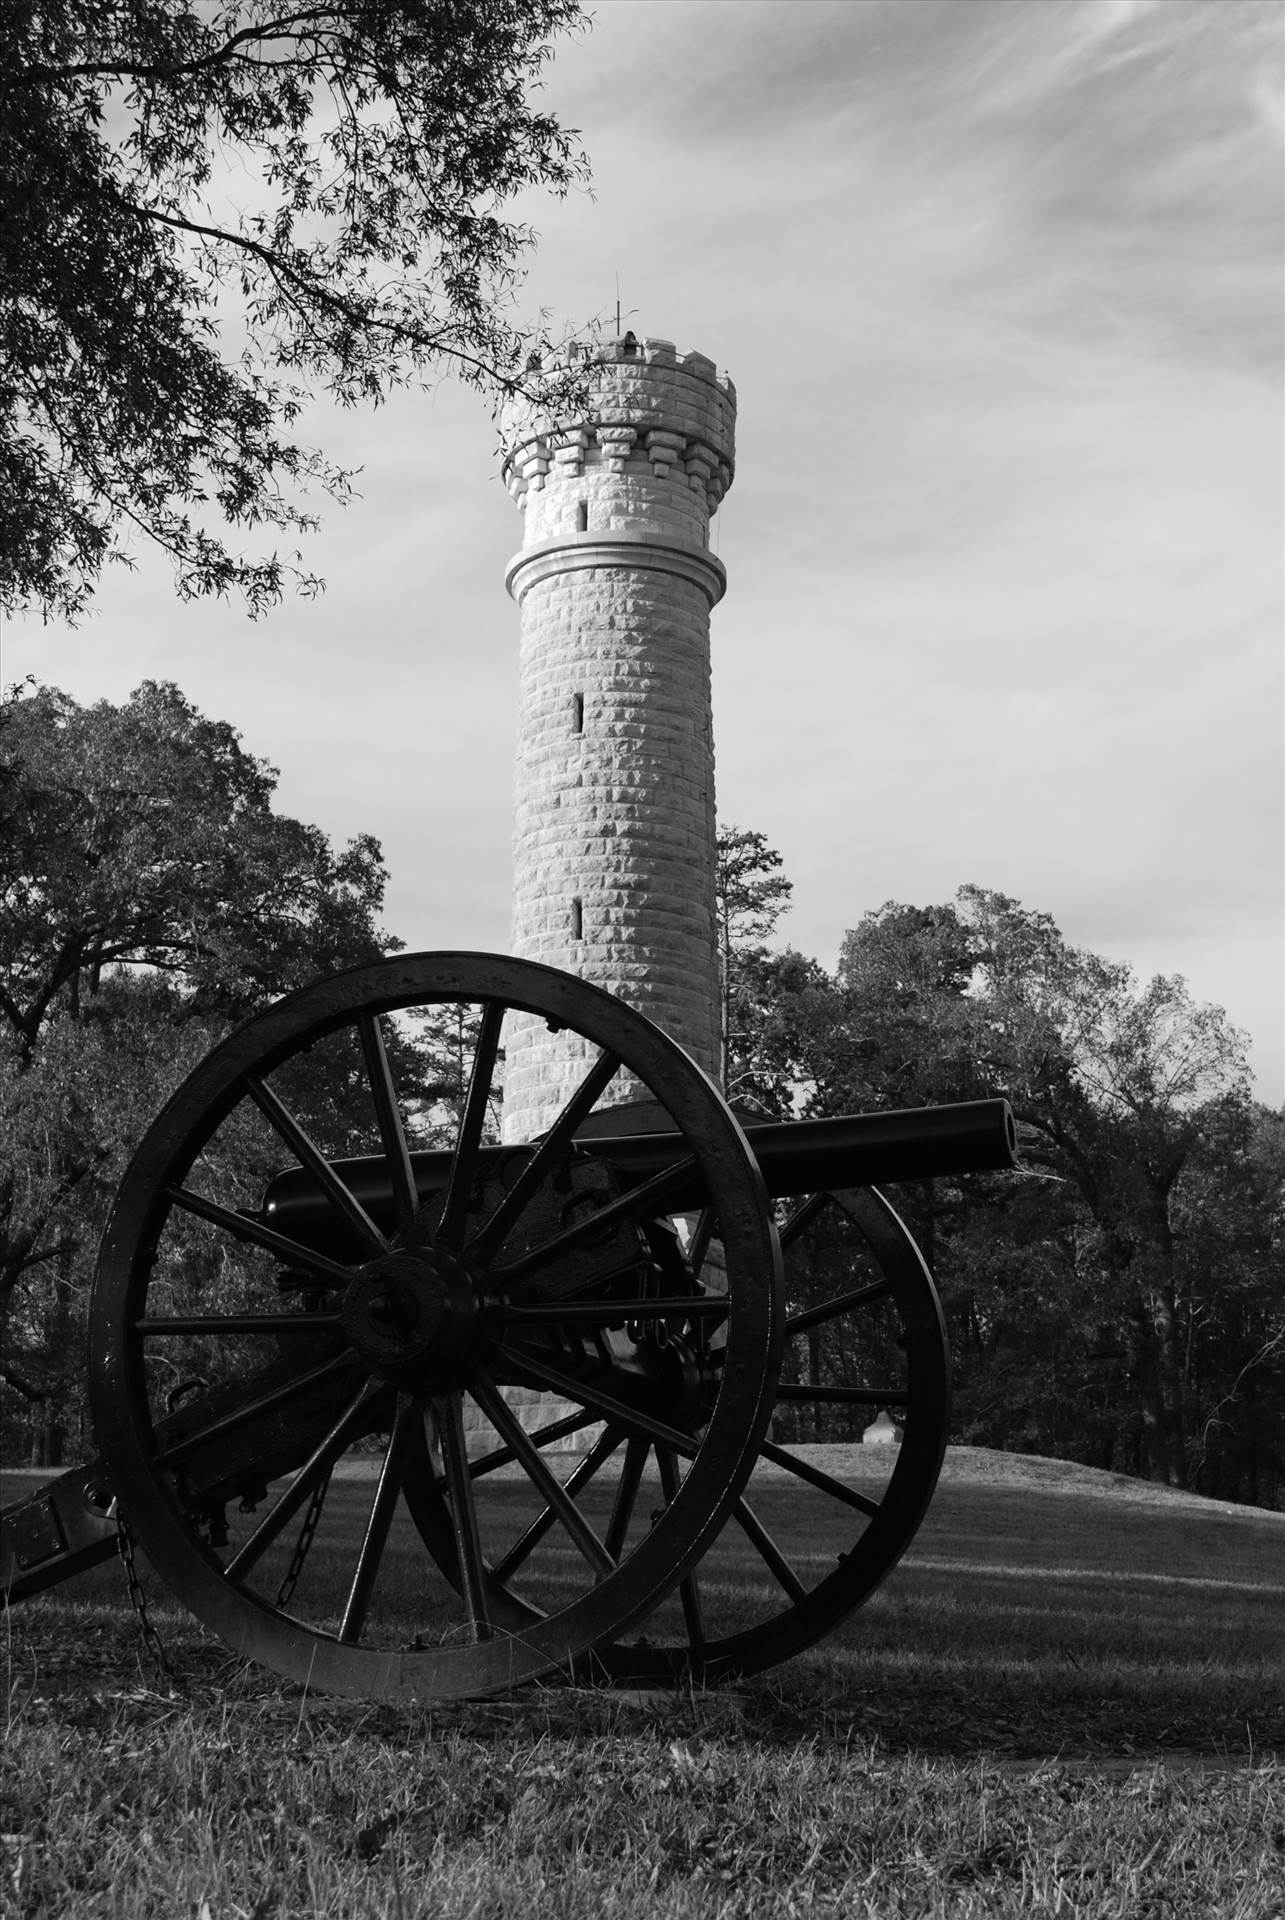 The Tower - View of the tower in the Chickamauga Civil War Battlefield National Park in Georgia, USA by lwmcclure3